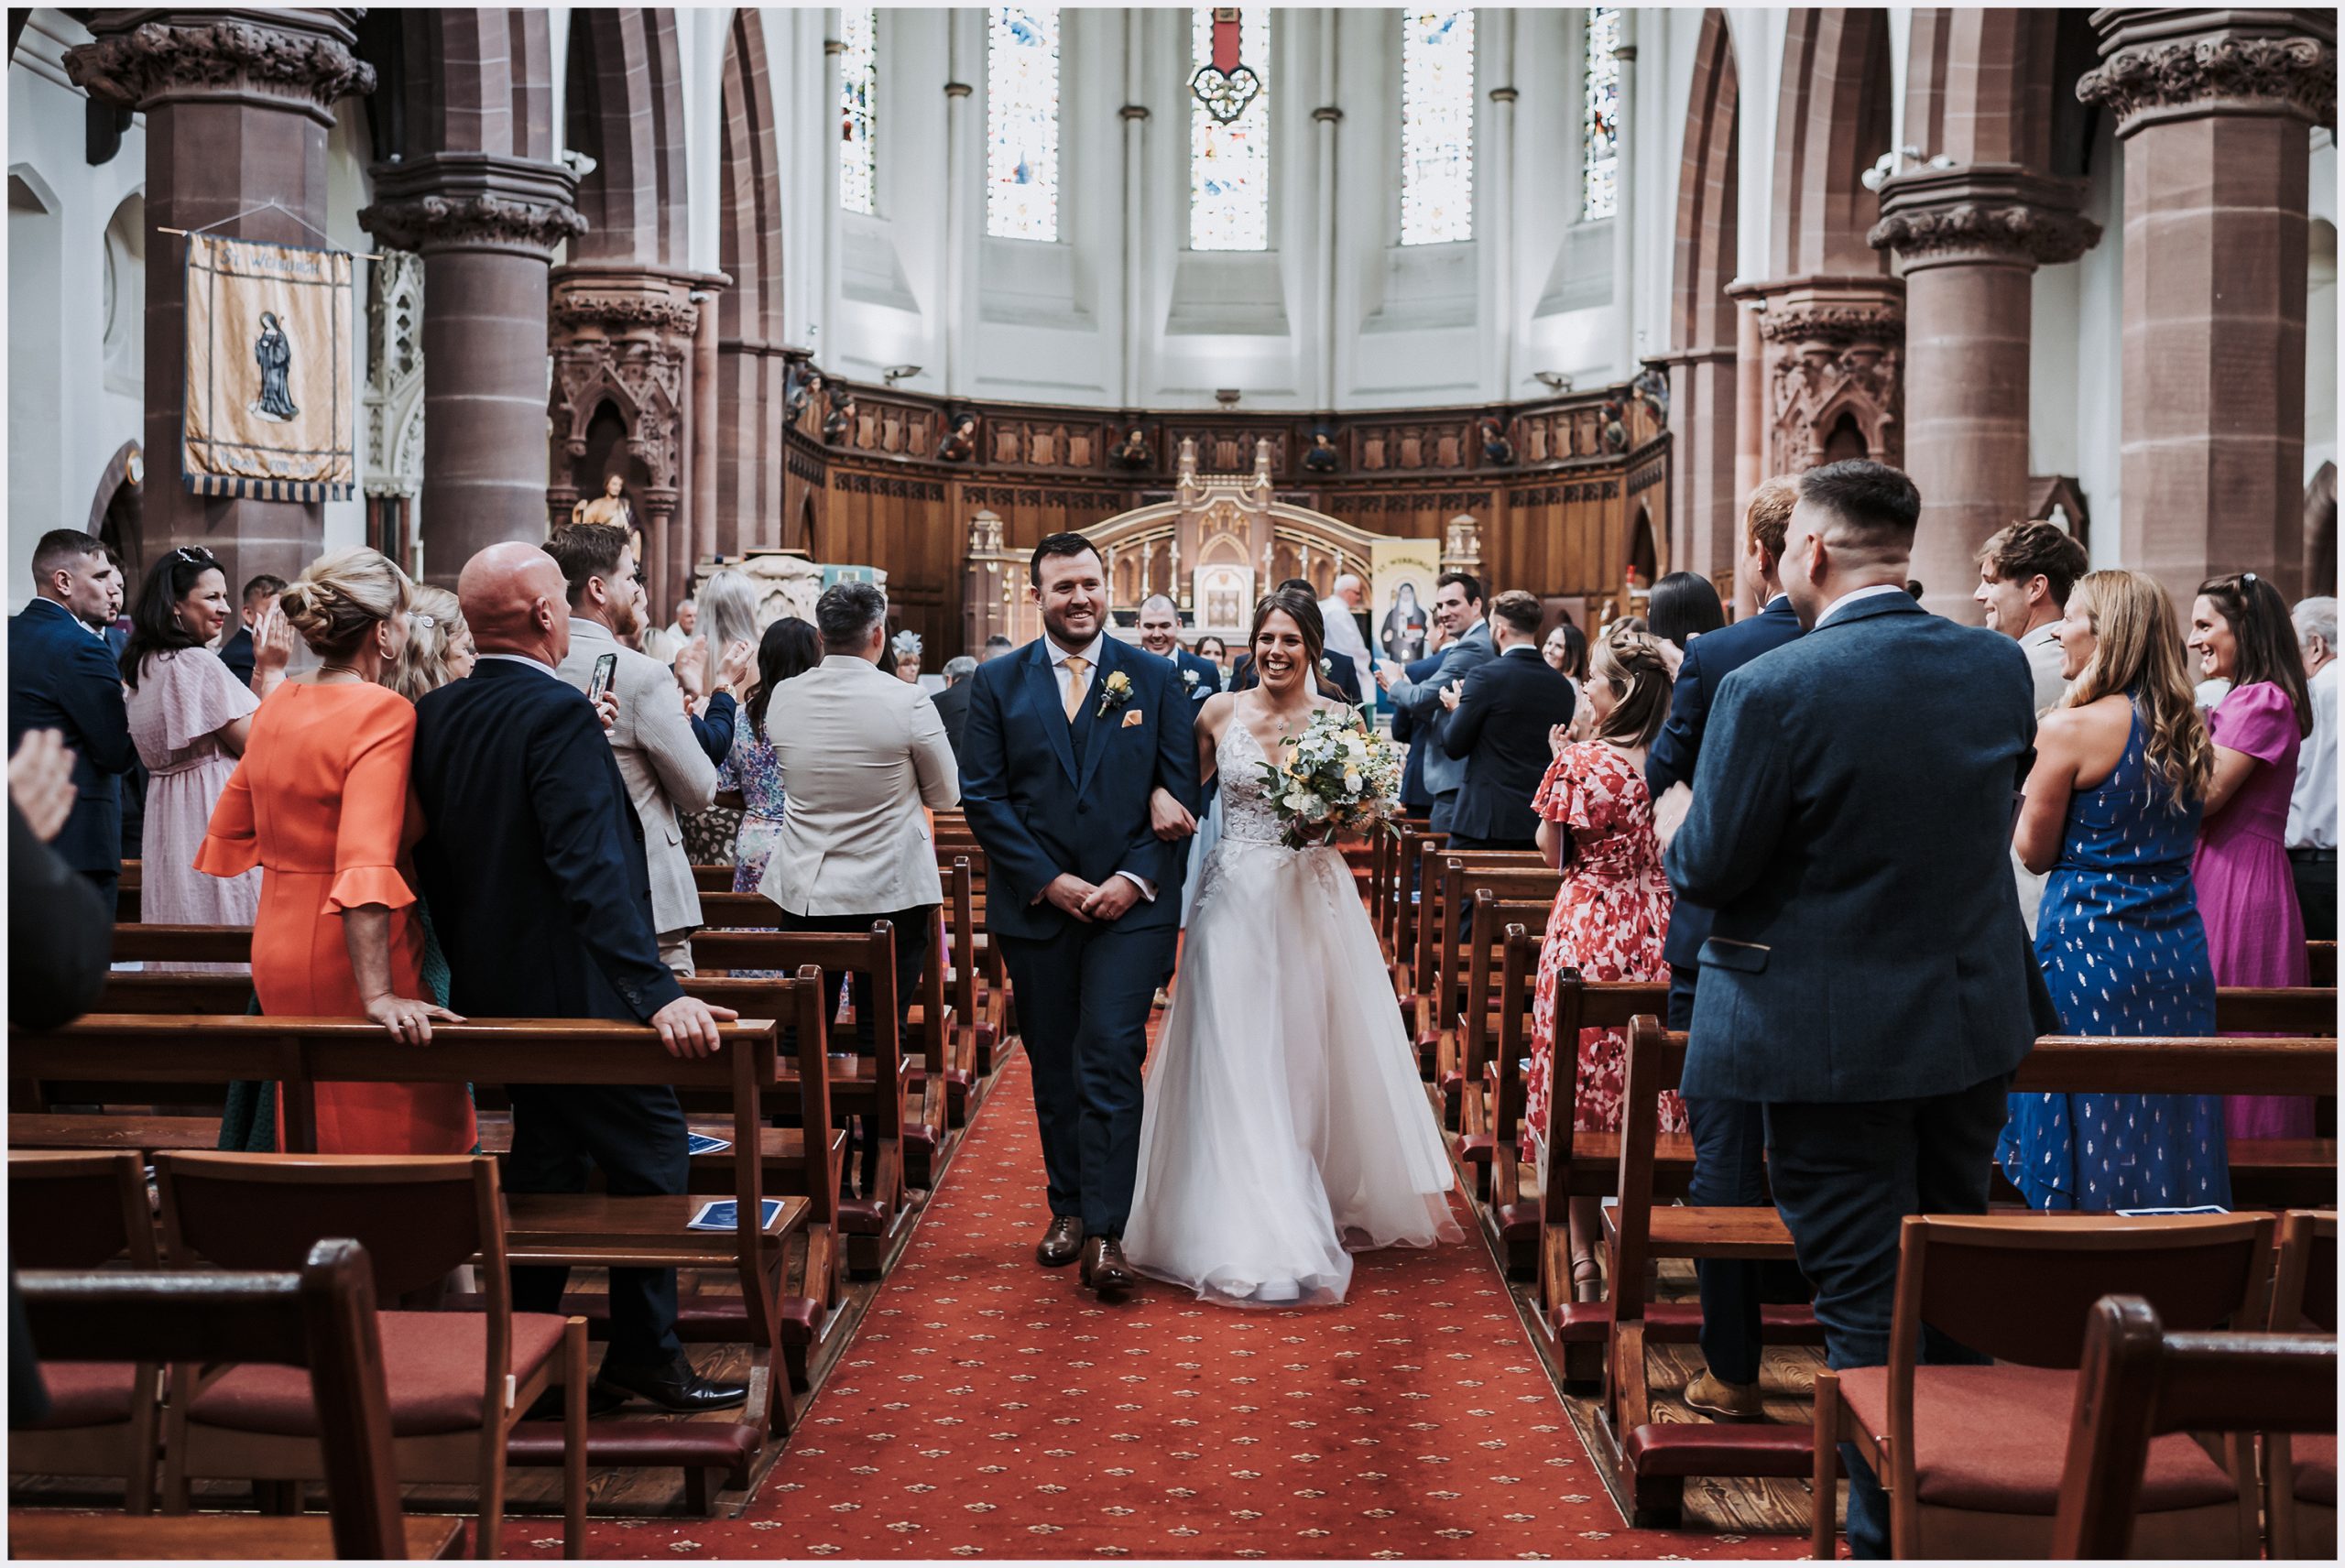 A wide shot of the back of the church as a the newly married smiling bride and groom walk outside after getting married.  Image captured by Helena Jayne Photography.